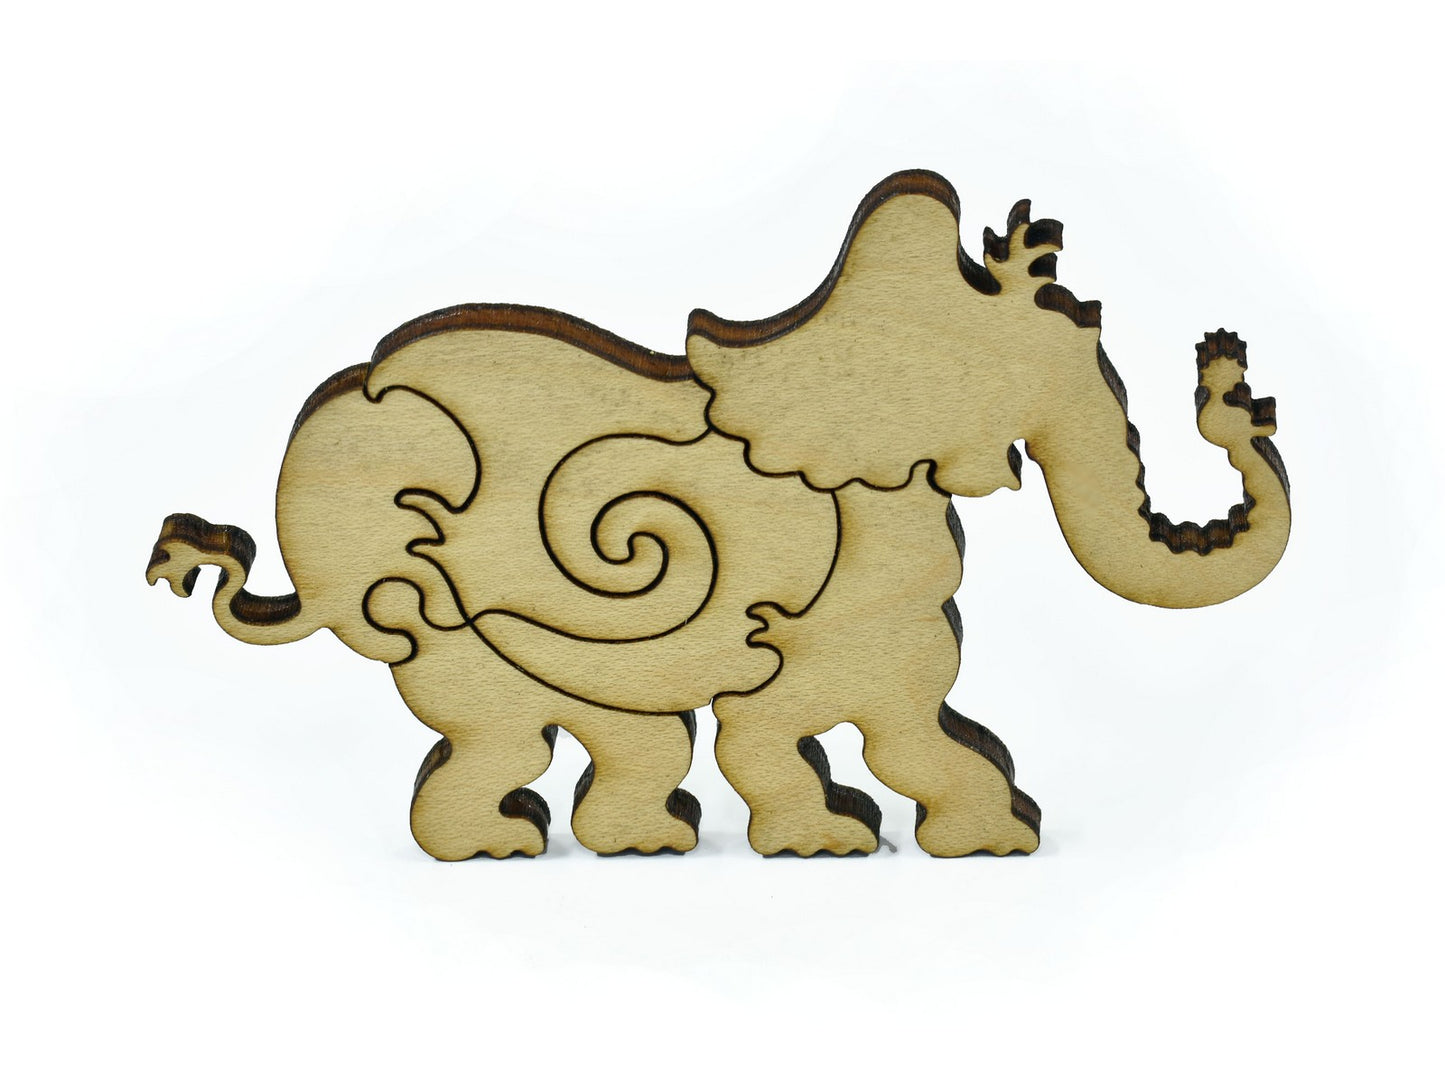 A closeup of pieces in the shape of an elephant.